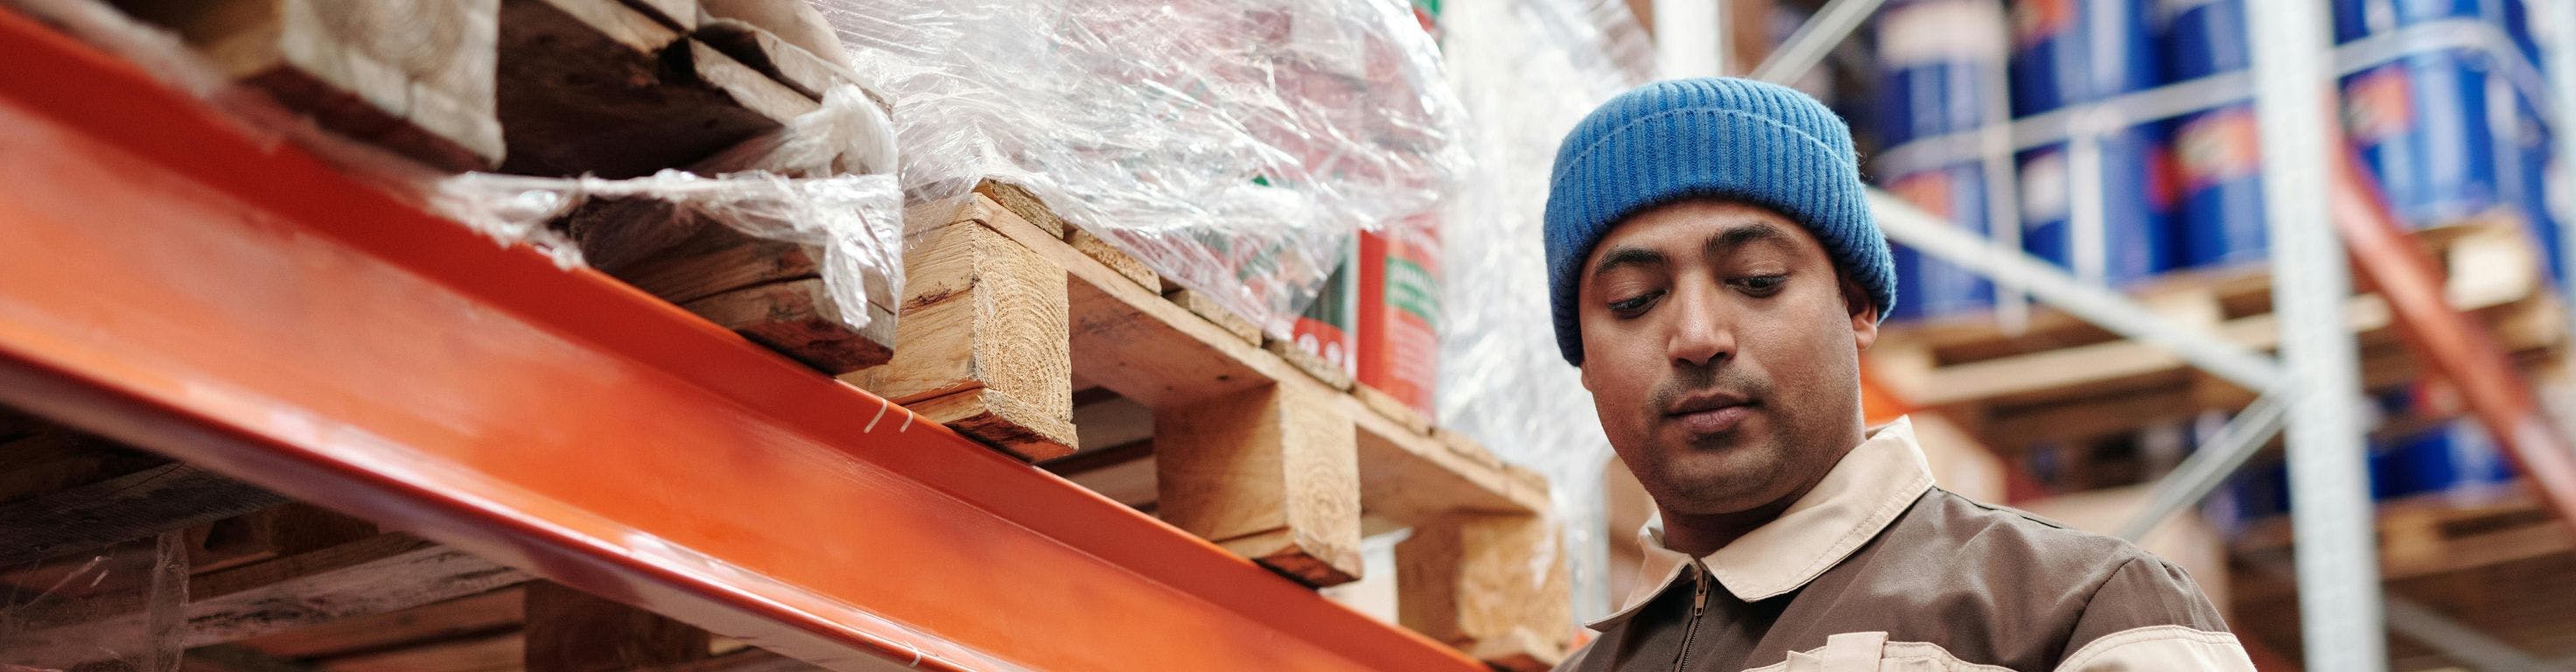 A worker wearing a blue beanie and a brown and beige uniform is holding a tablet and standing beside shelves in a warehouse. Several large containers and pallets are visible around him.